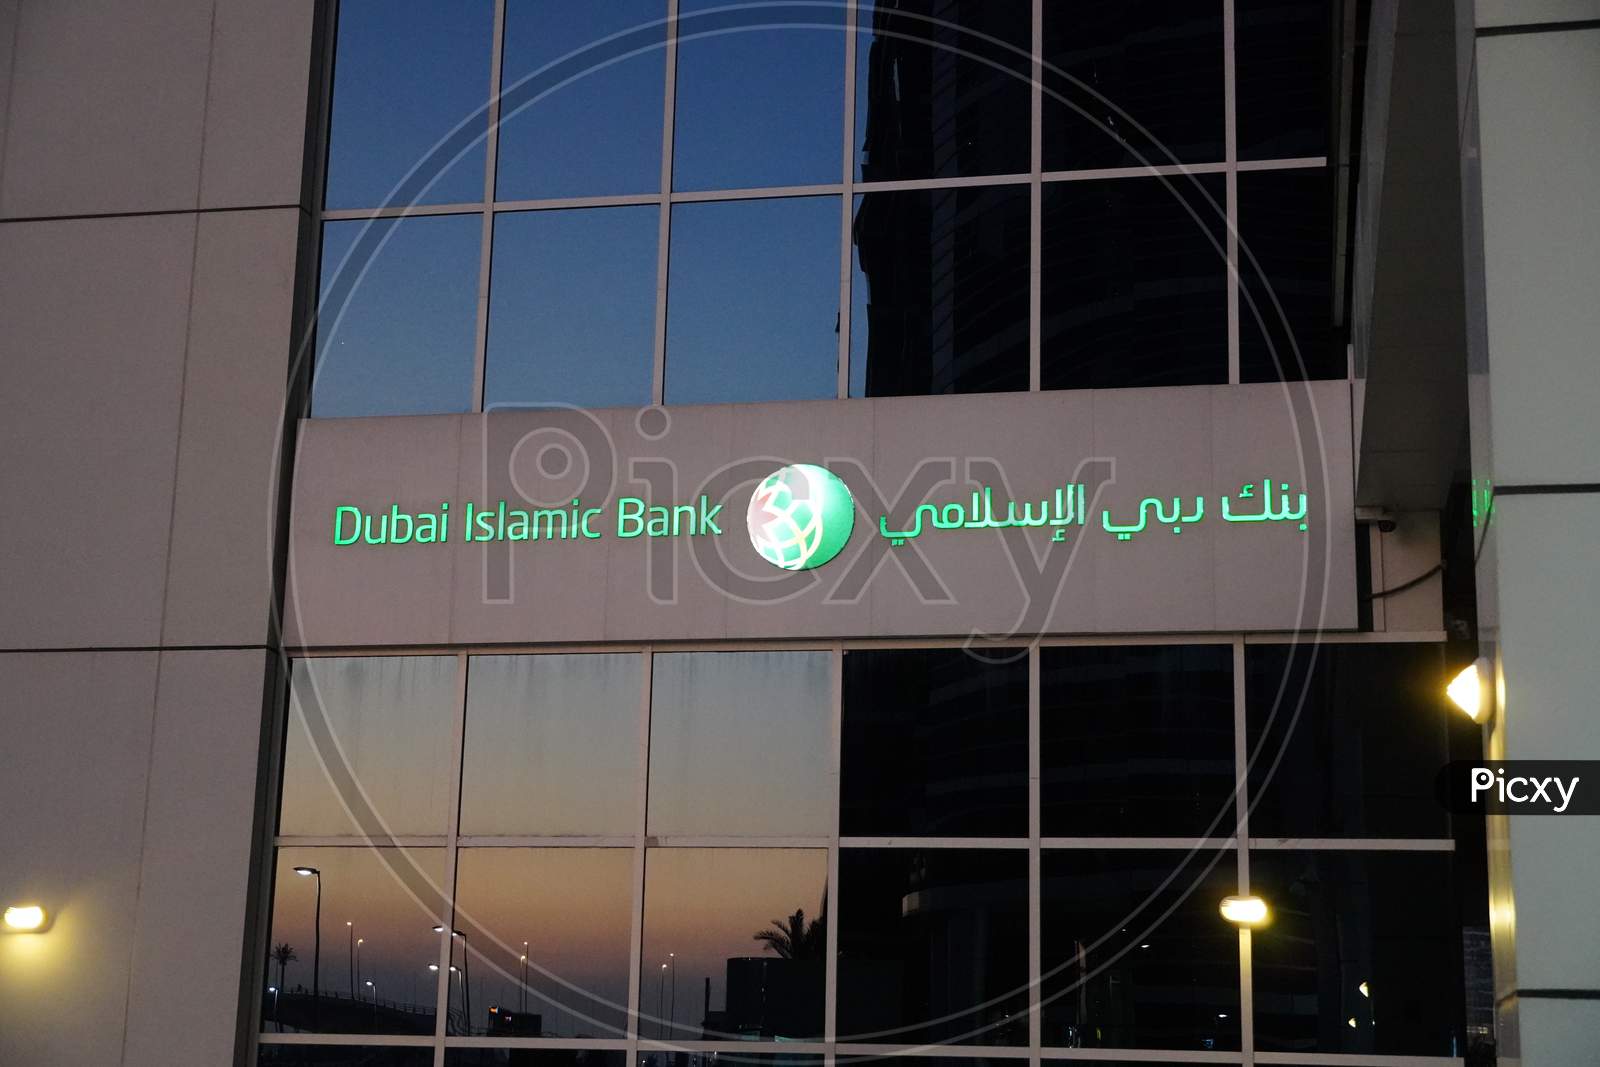 Dubai Uae December 2019 - Dubai Islamic Bank A Major Middle Eastern Banks Building Sign Logo On Large Building In Evening. Night Time View.